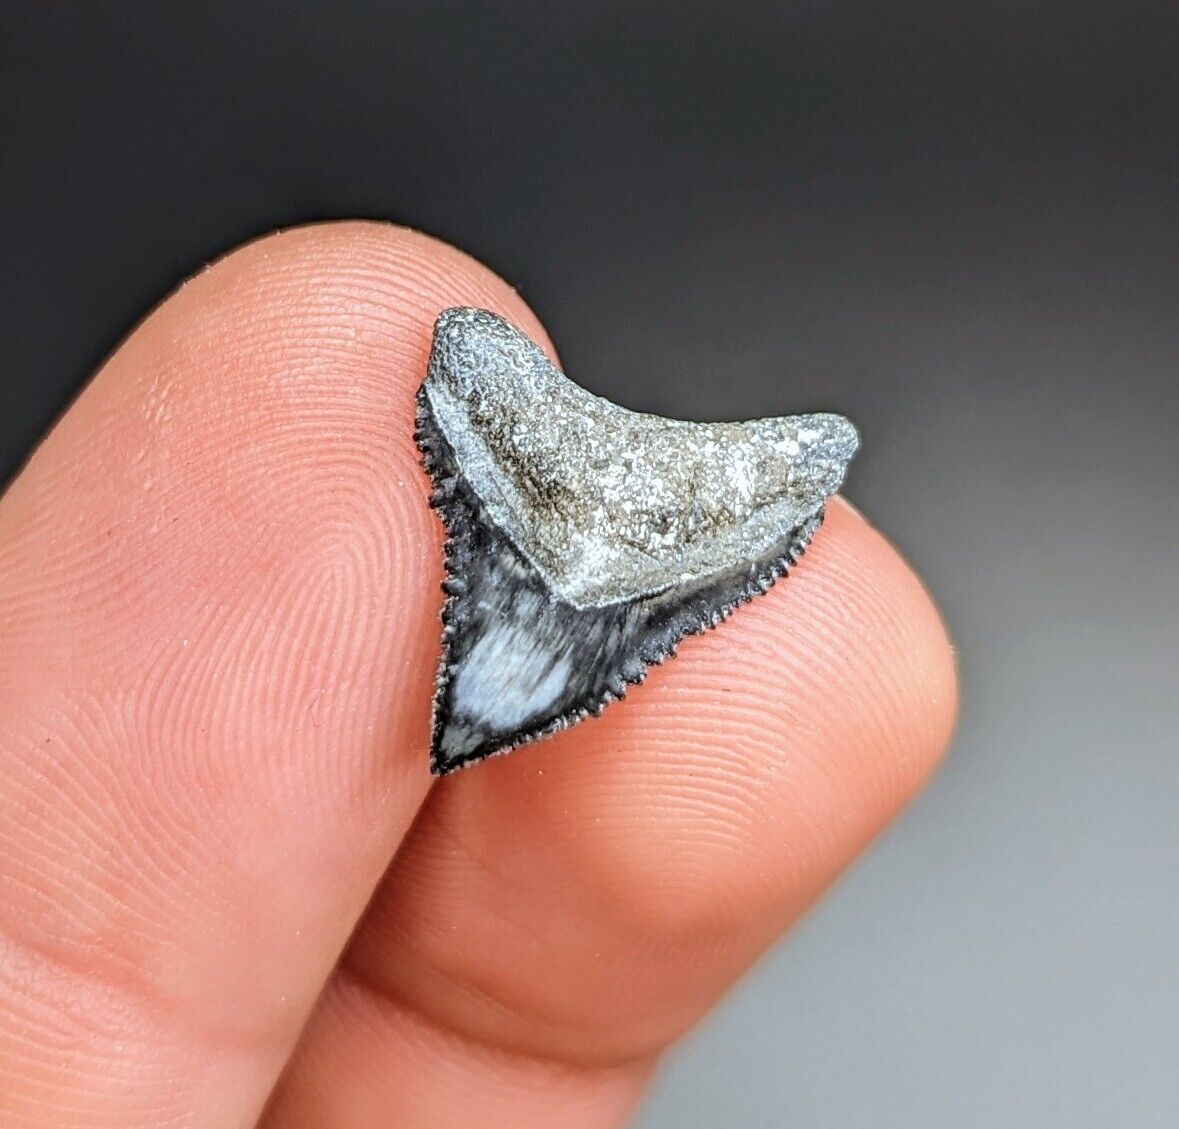 Killer Unique Bull Shark Tooth From North Florida